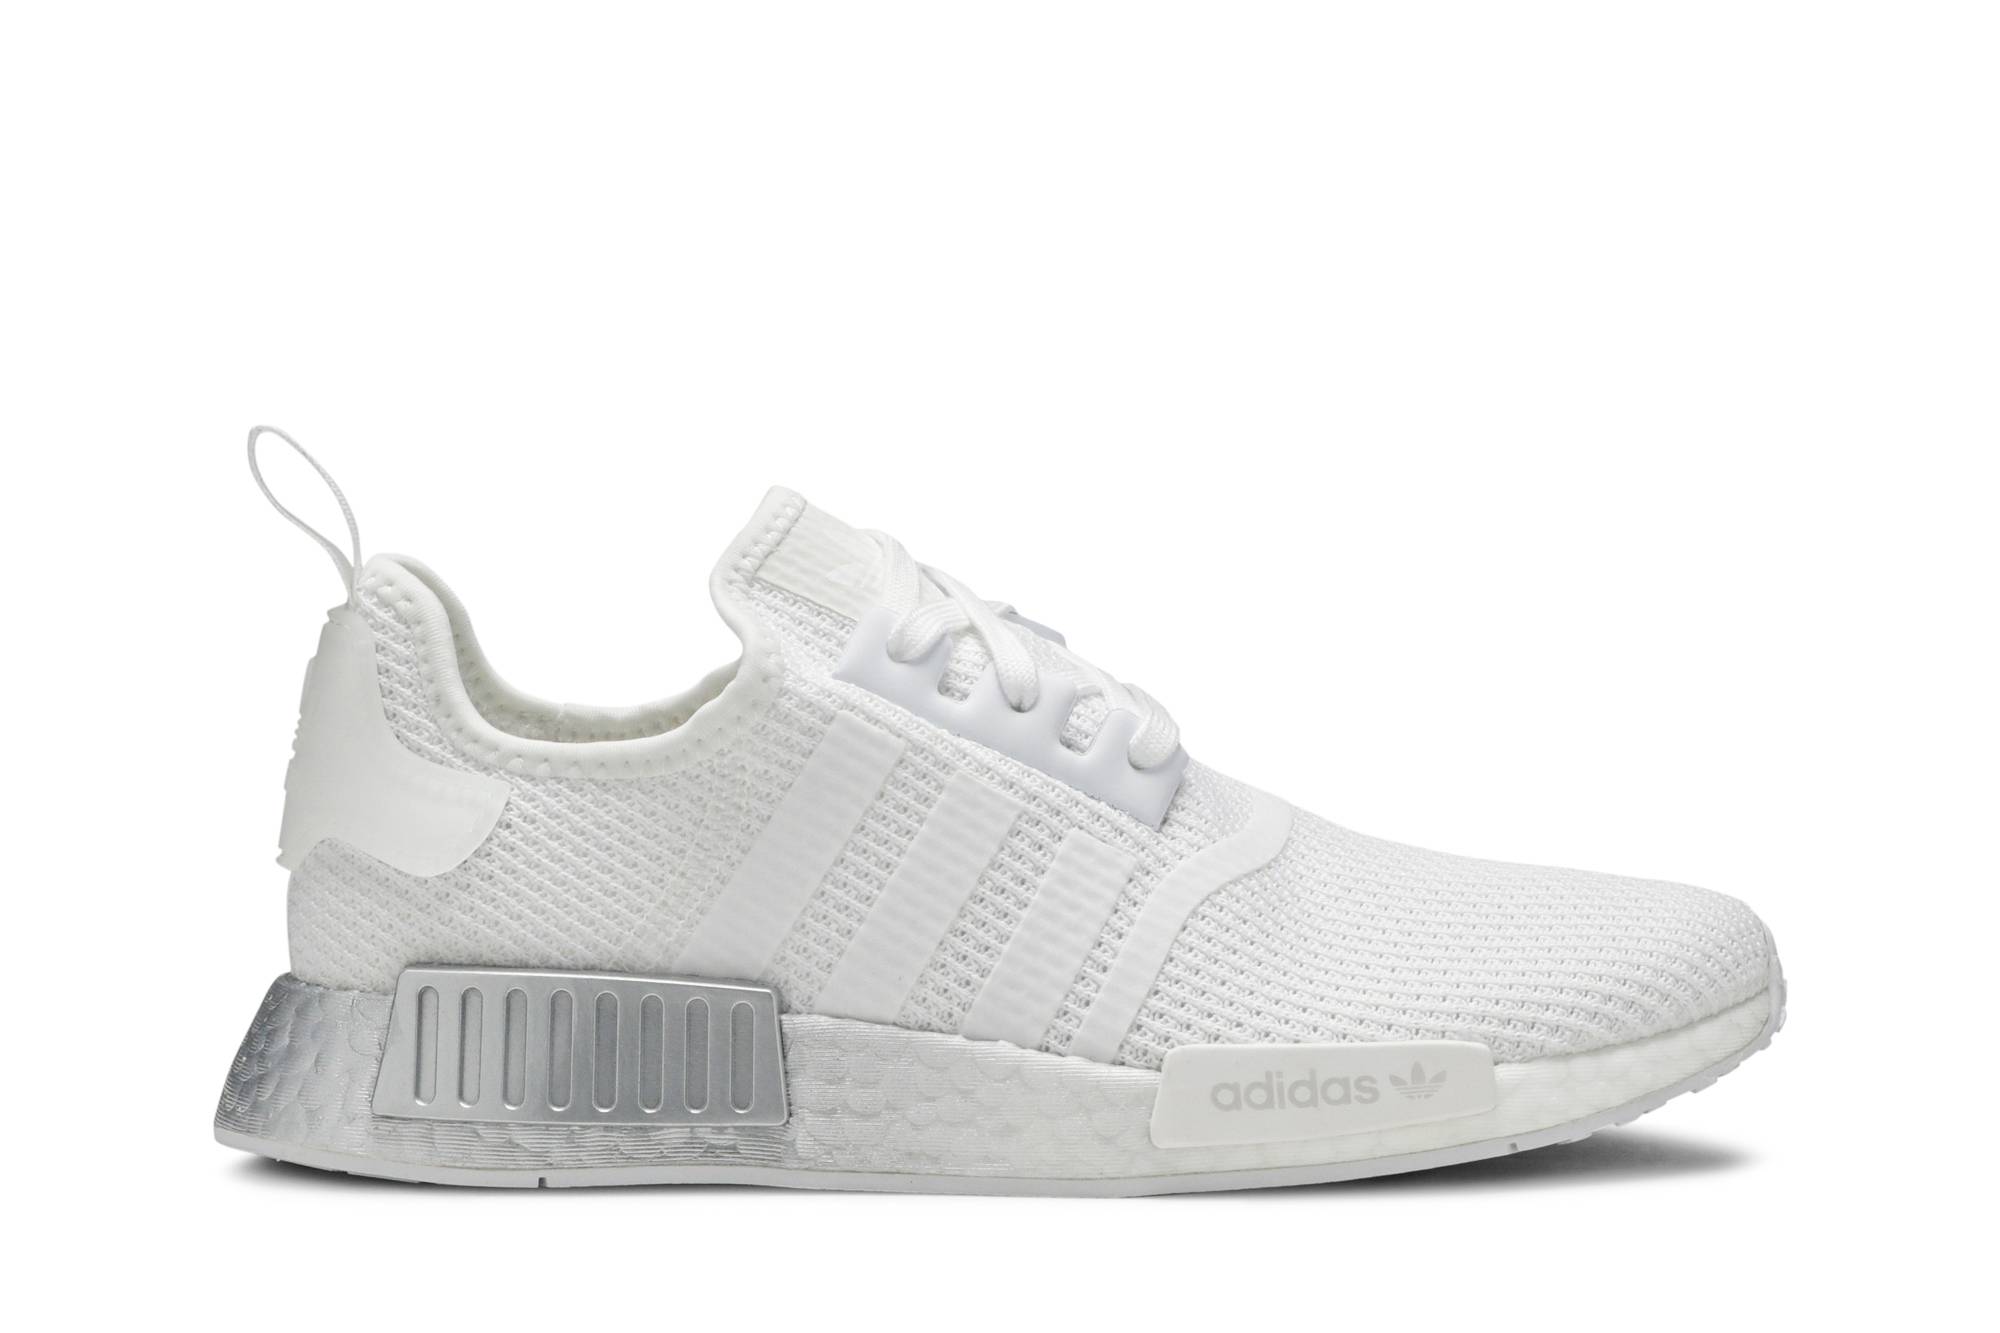 nmd crystal white